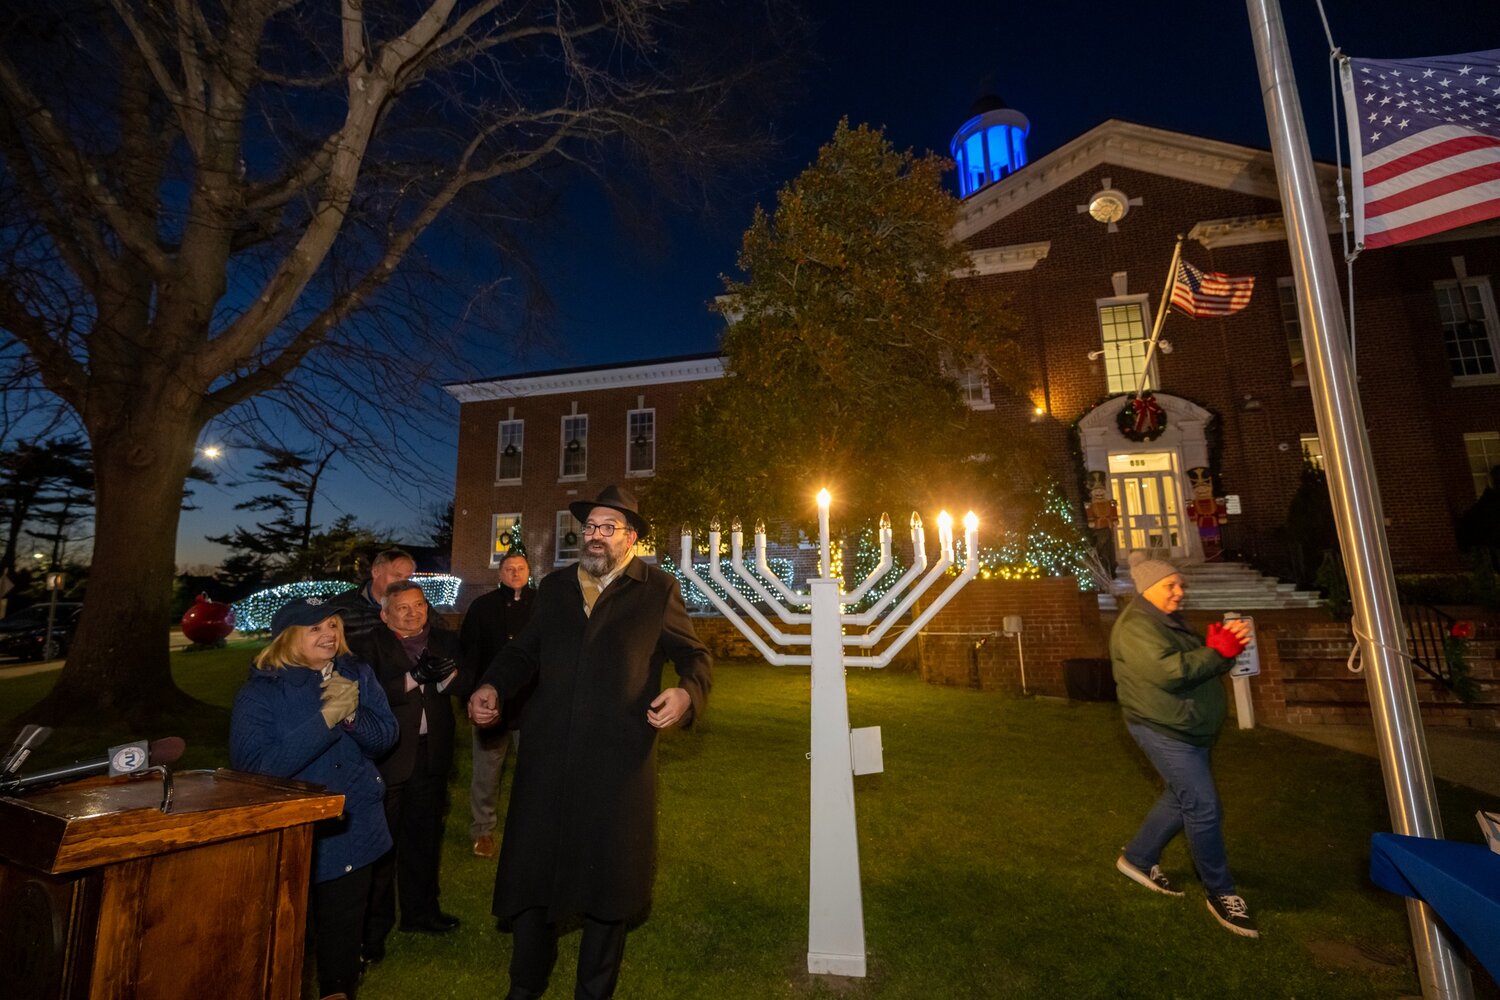 Last year's Town of Islip Menorah lighting ceremony at the steps of Town Hall.